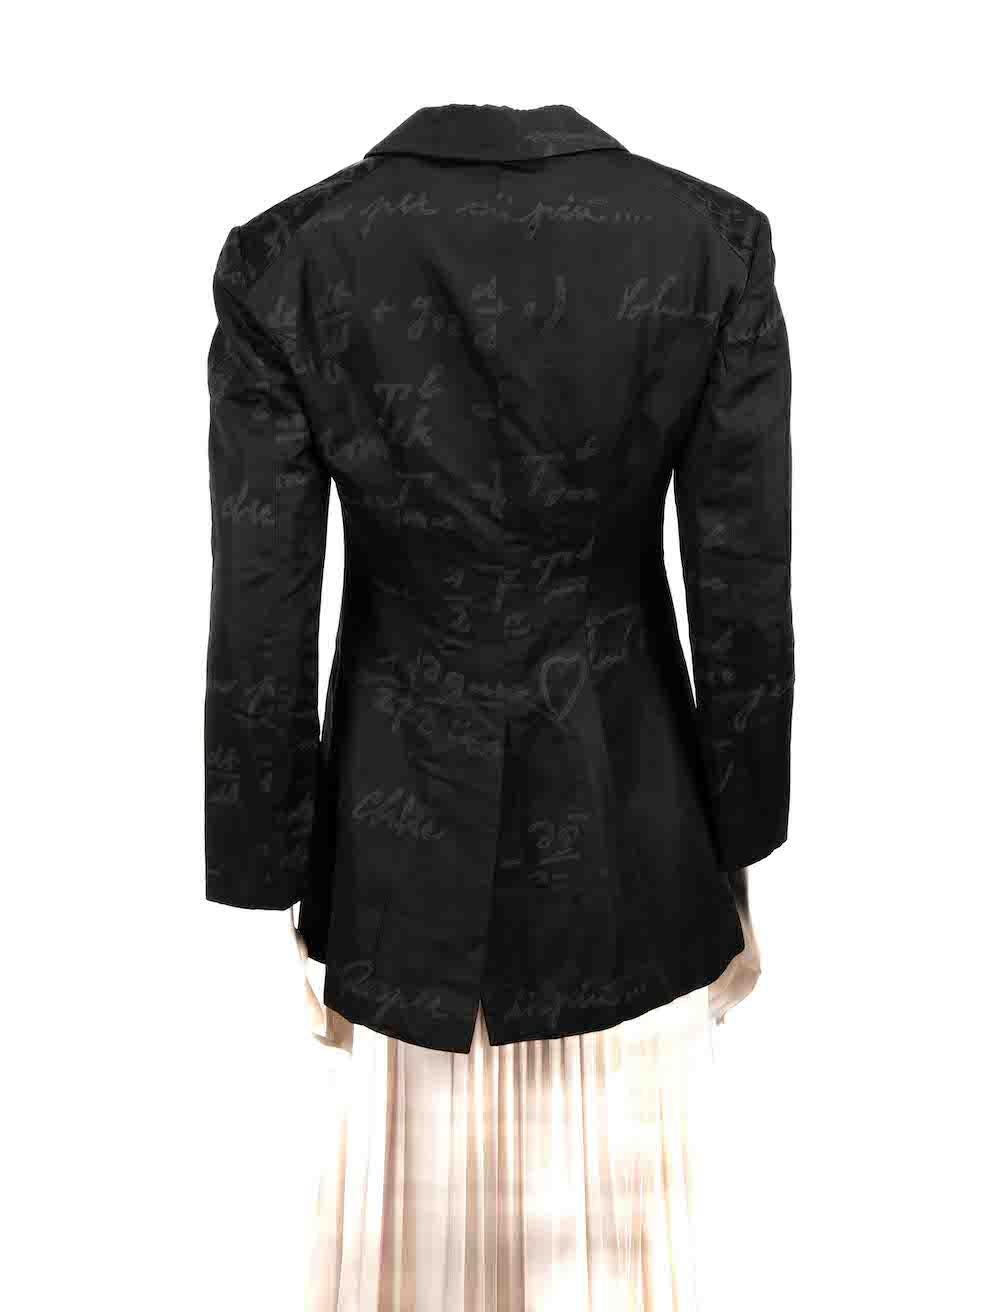 Moschino Black Logo Jacquard Blazer Jacket Size M In Excellent Condition For Sale In London, GB